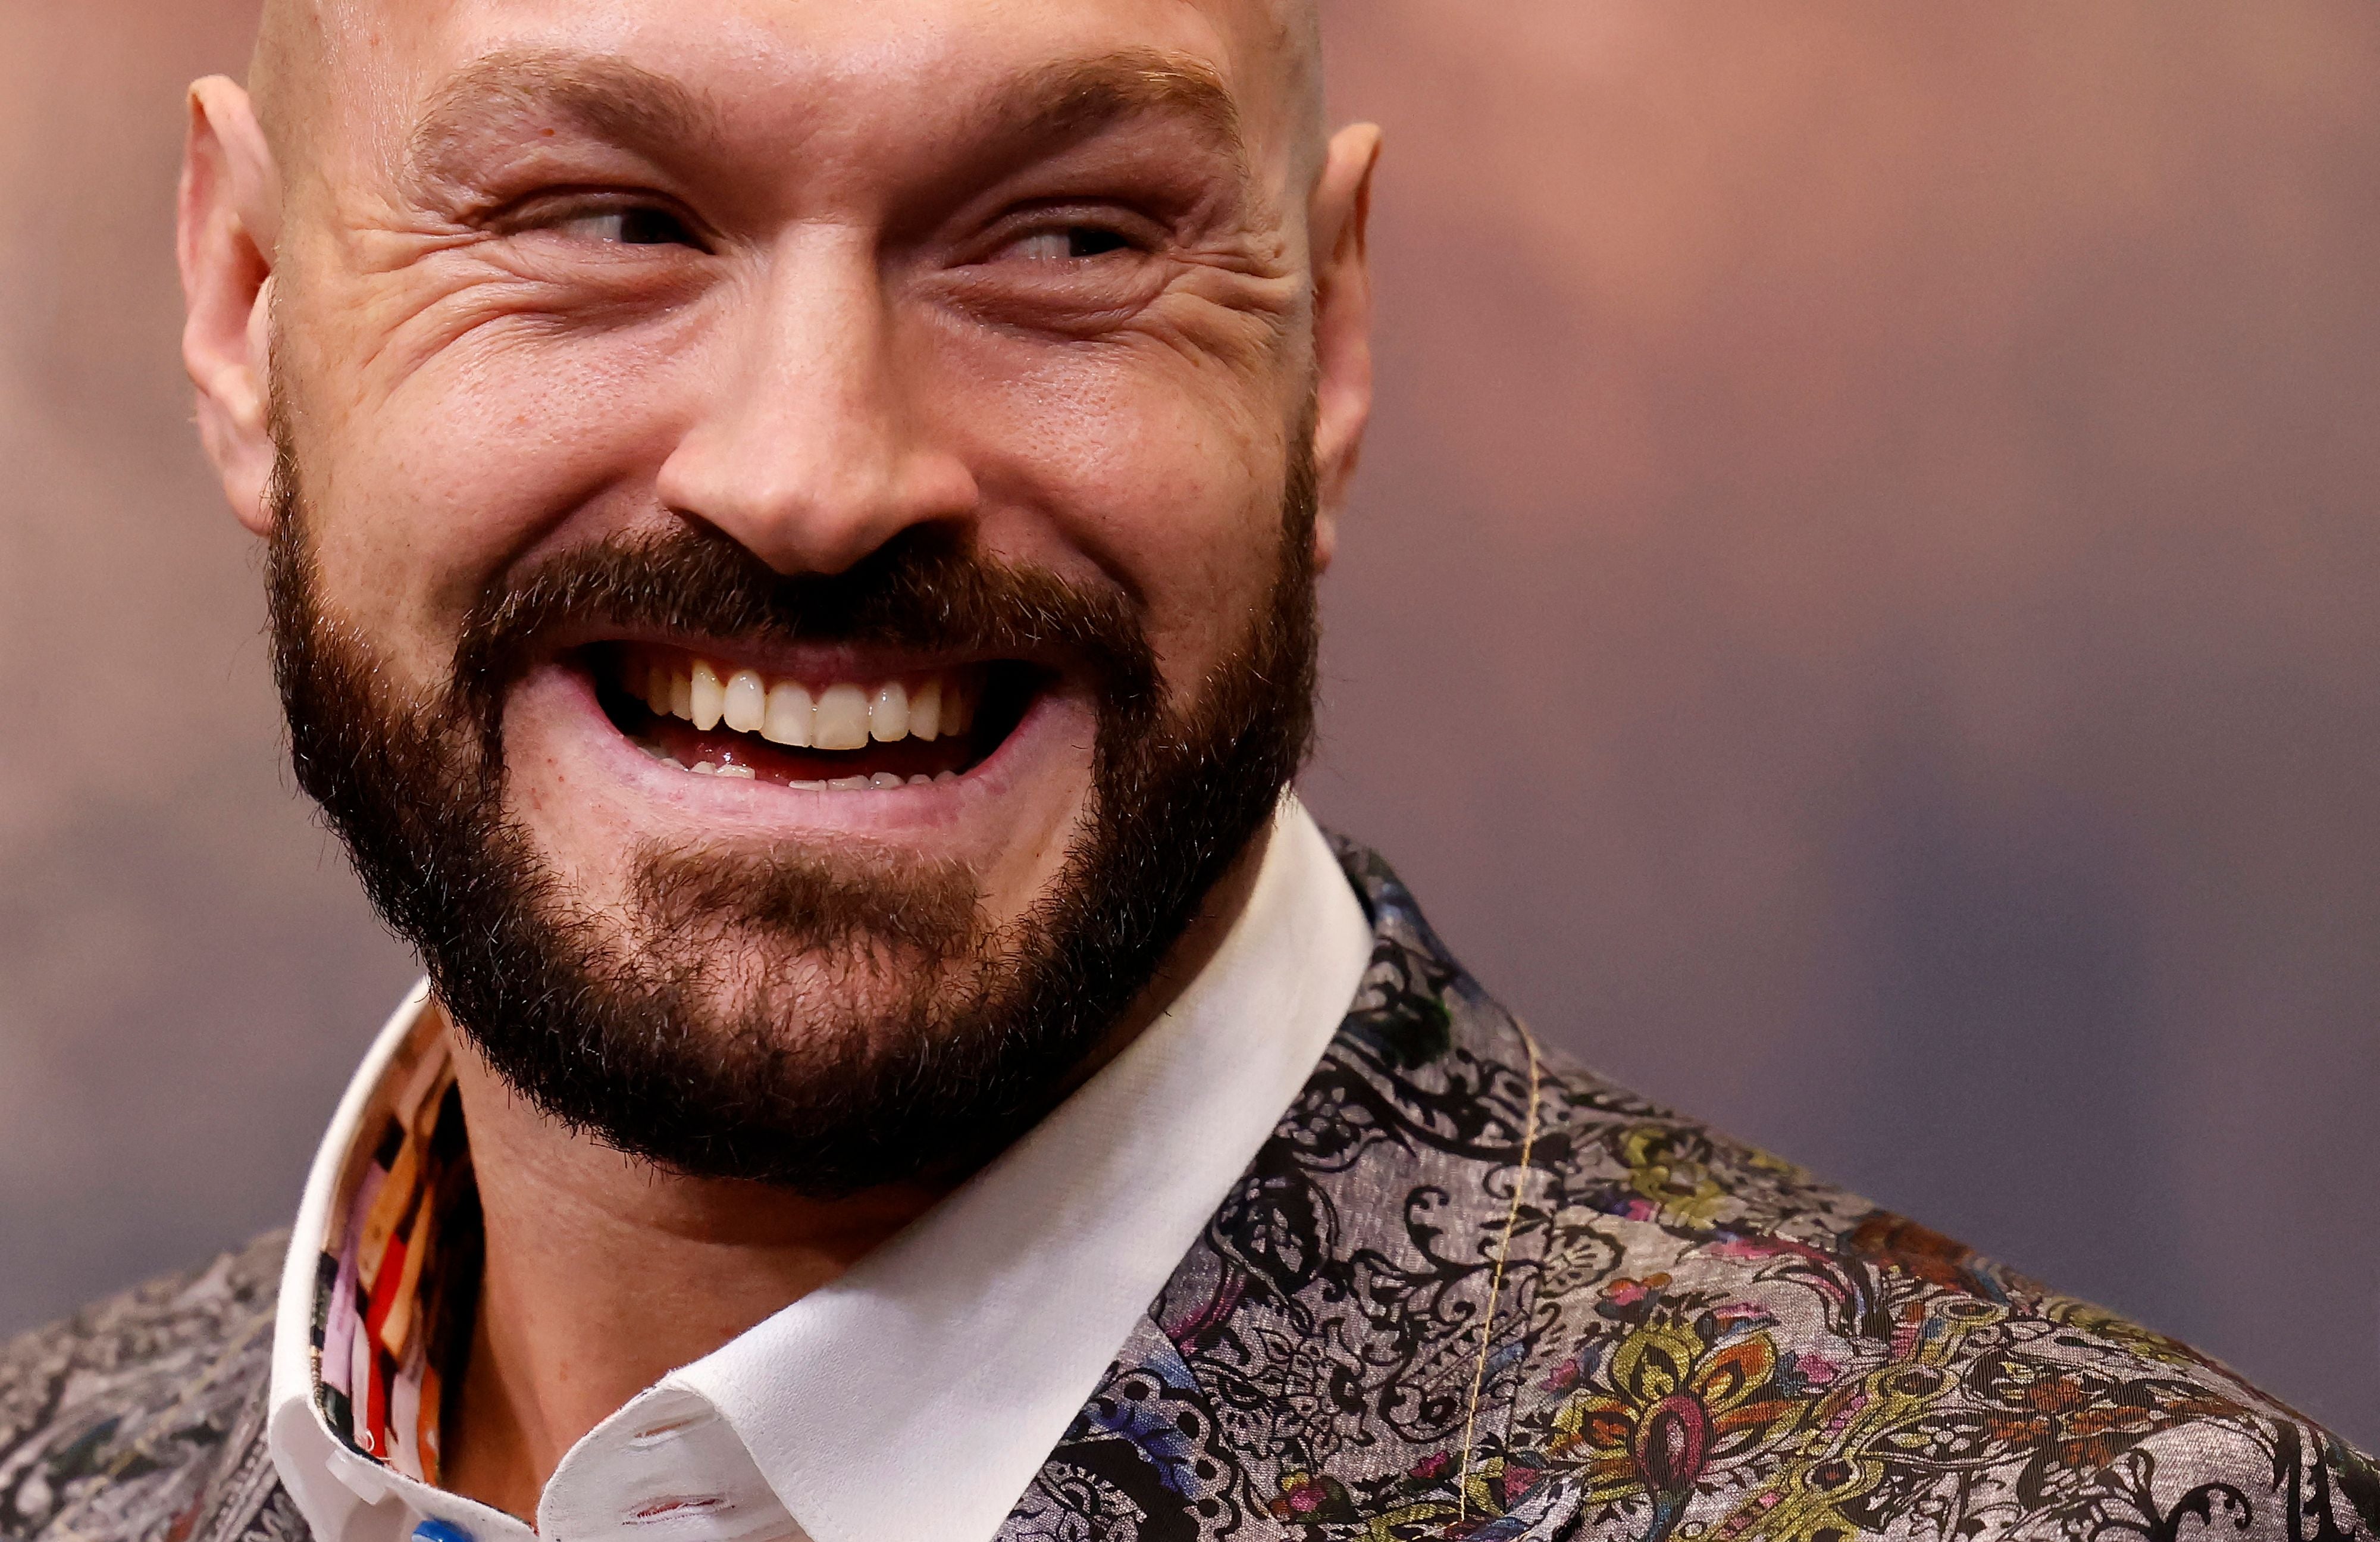 Tyson Fury mocked Eddie Hearn after the promoter’s prediction on ticket sales was proved wrong